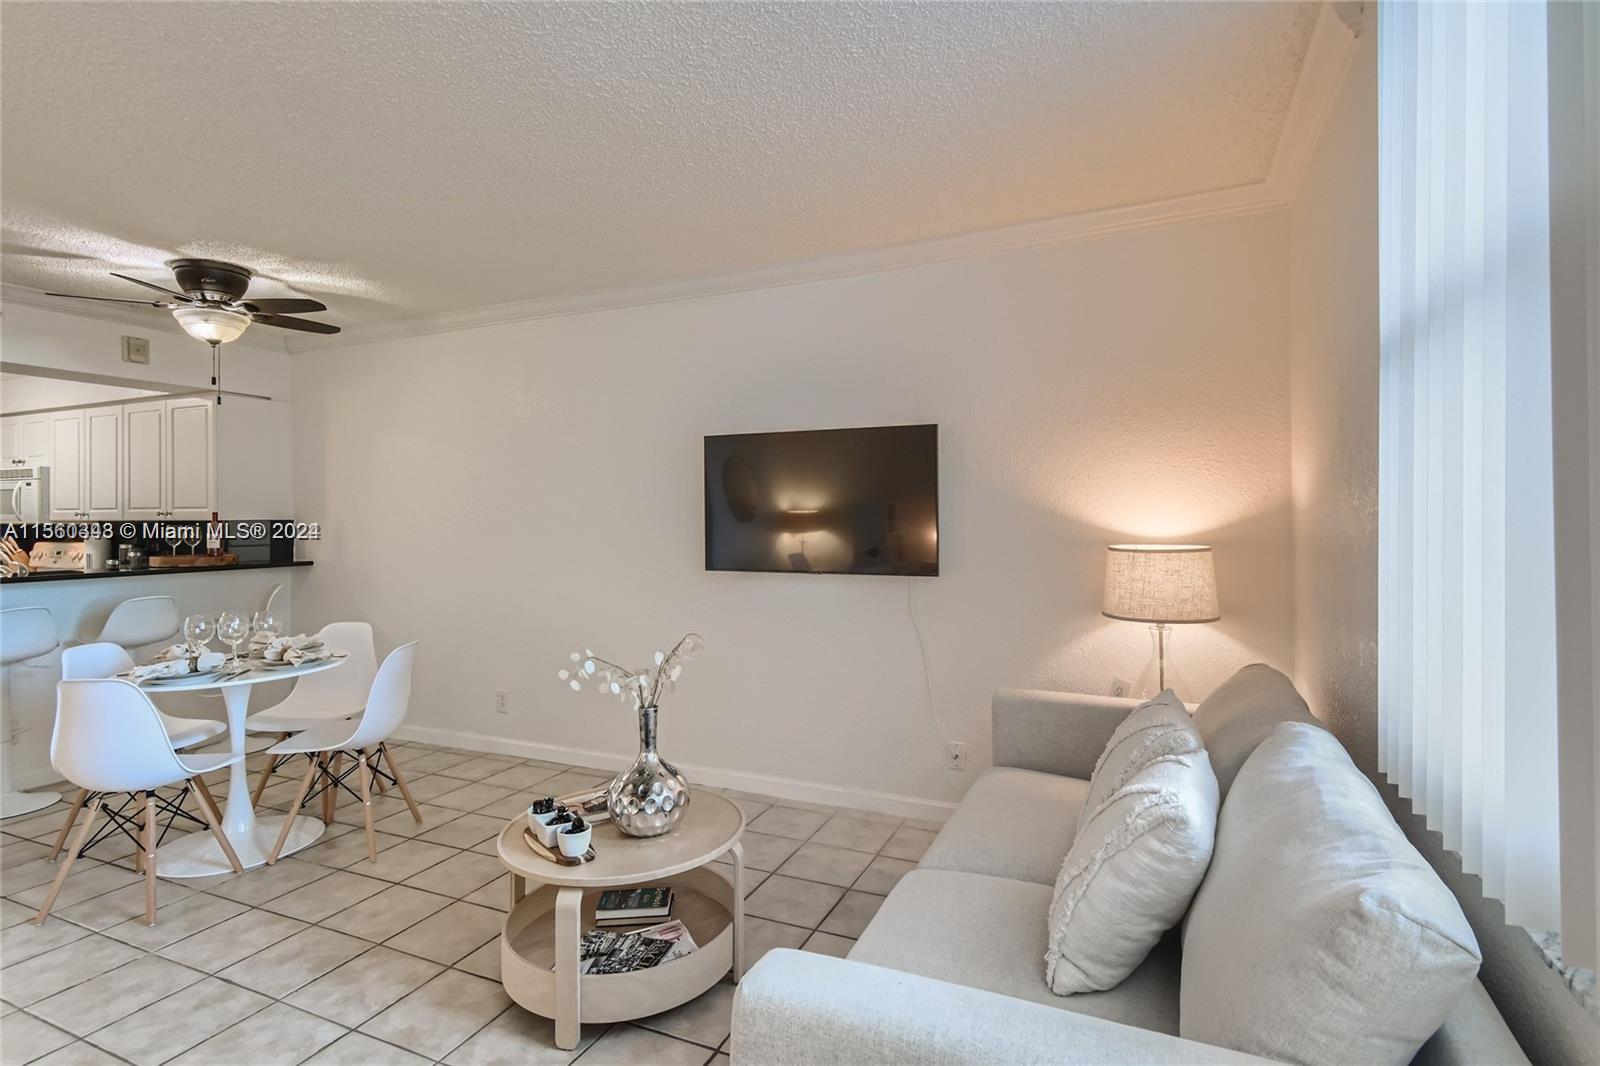 Photo of 2501 S Ocean Dr #432 in Hollywood, FL